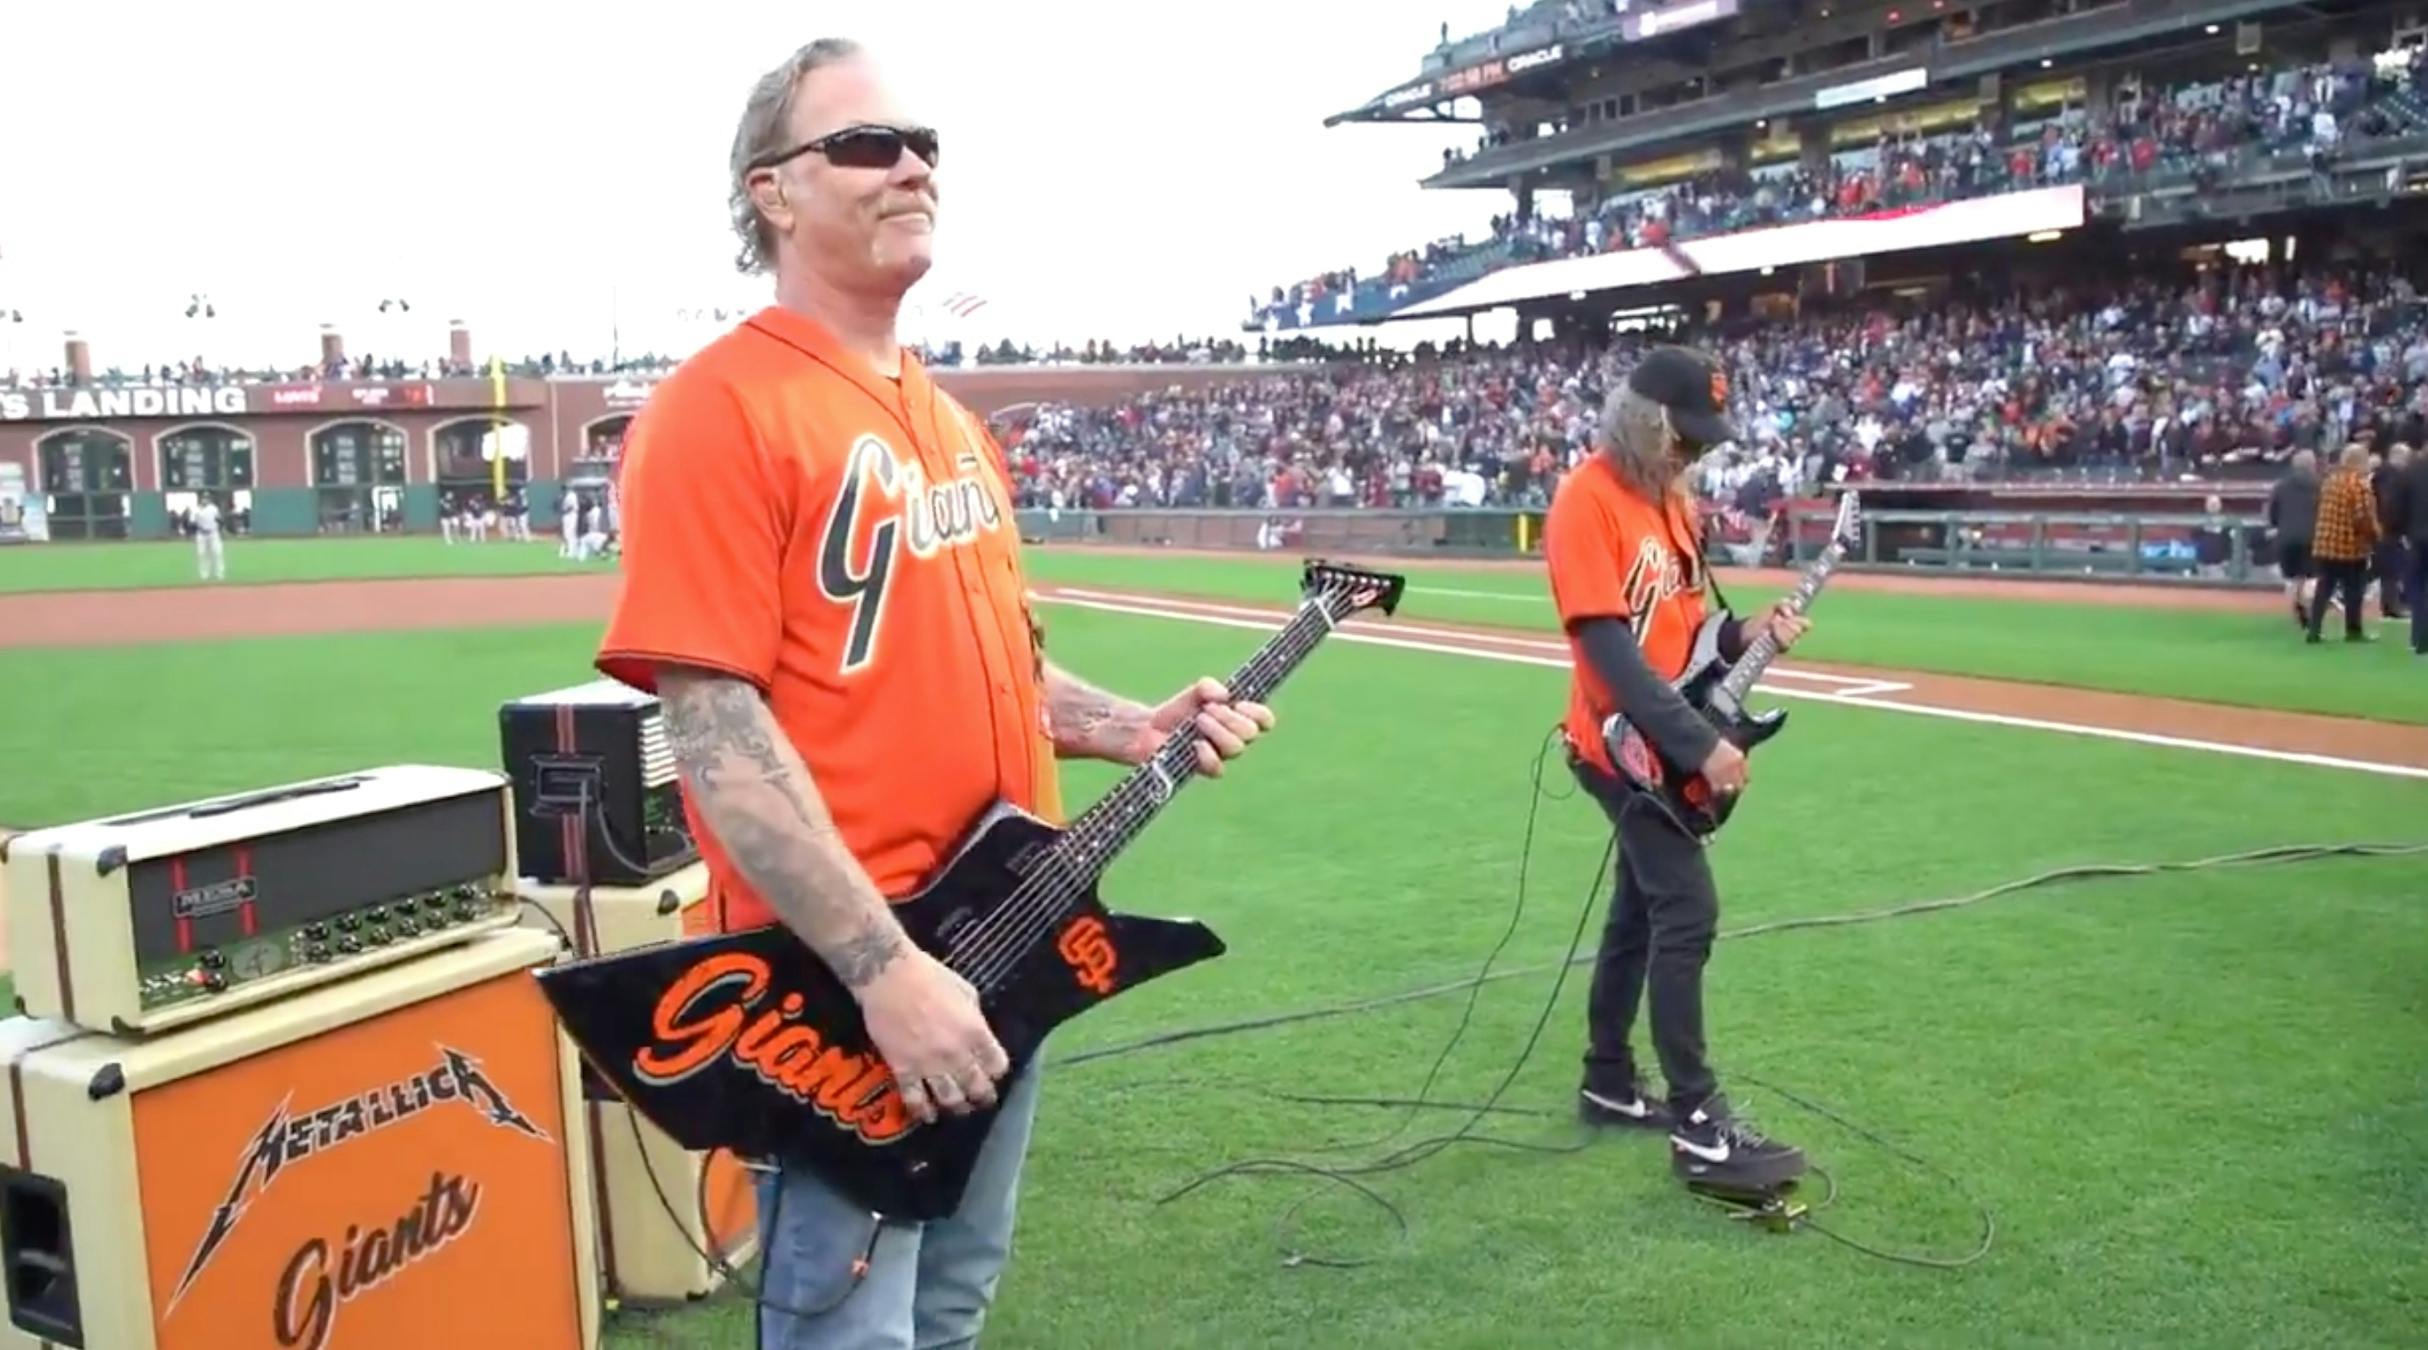 Watch Metallica's James Hetfield And Kirk Hammett Play The National Anthem At A San Francisco Giants Game